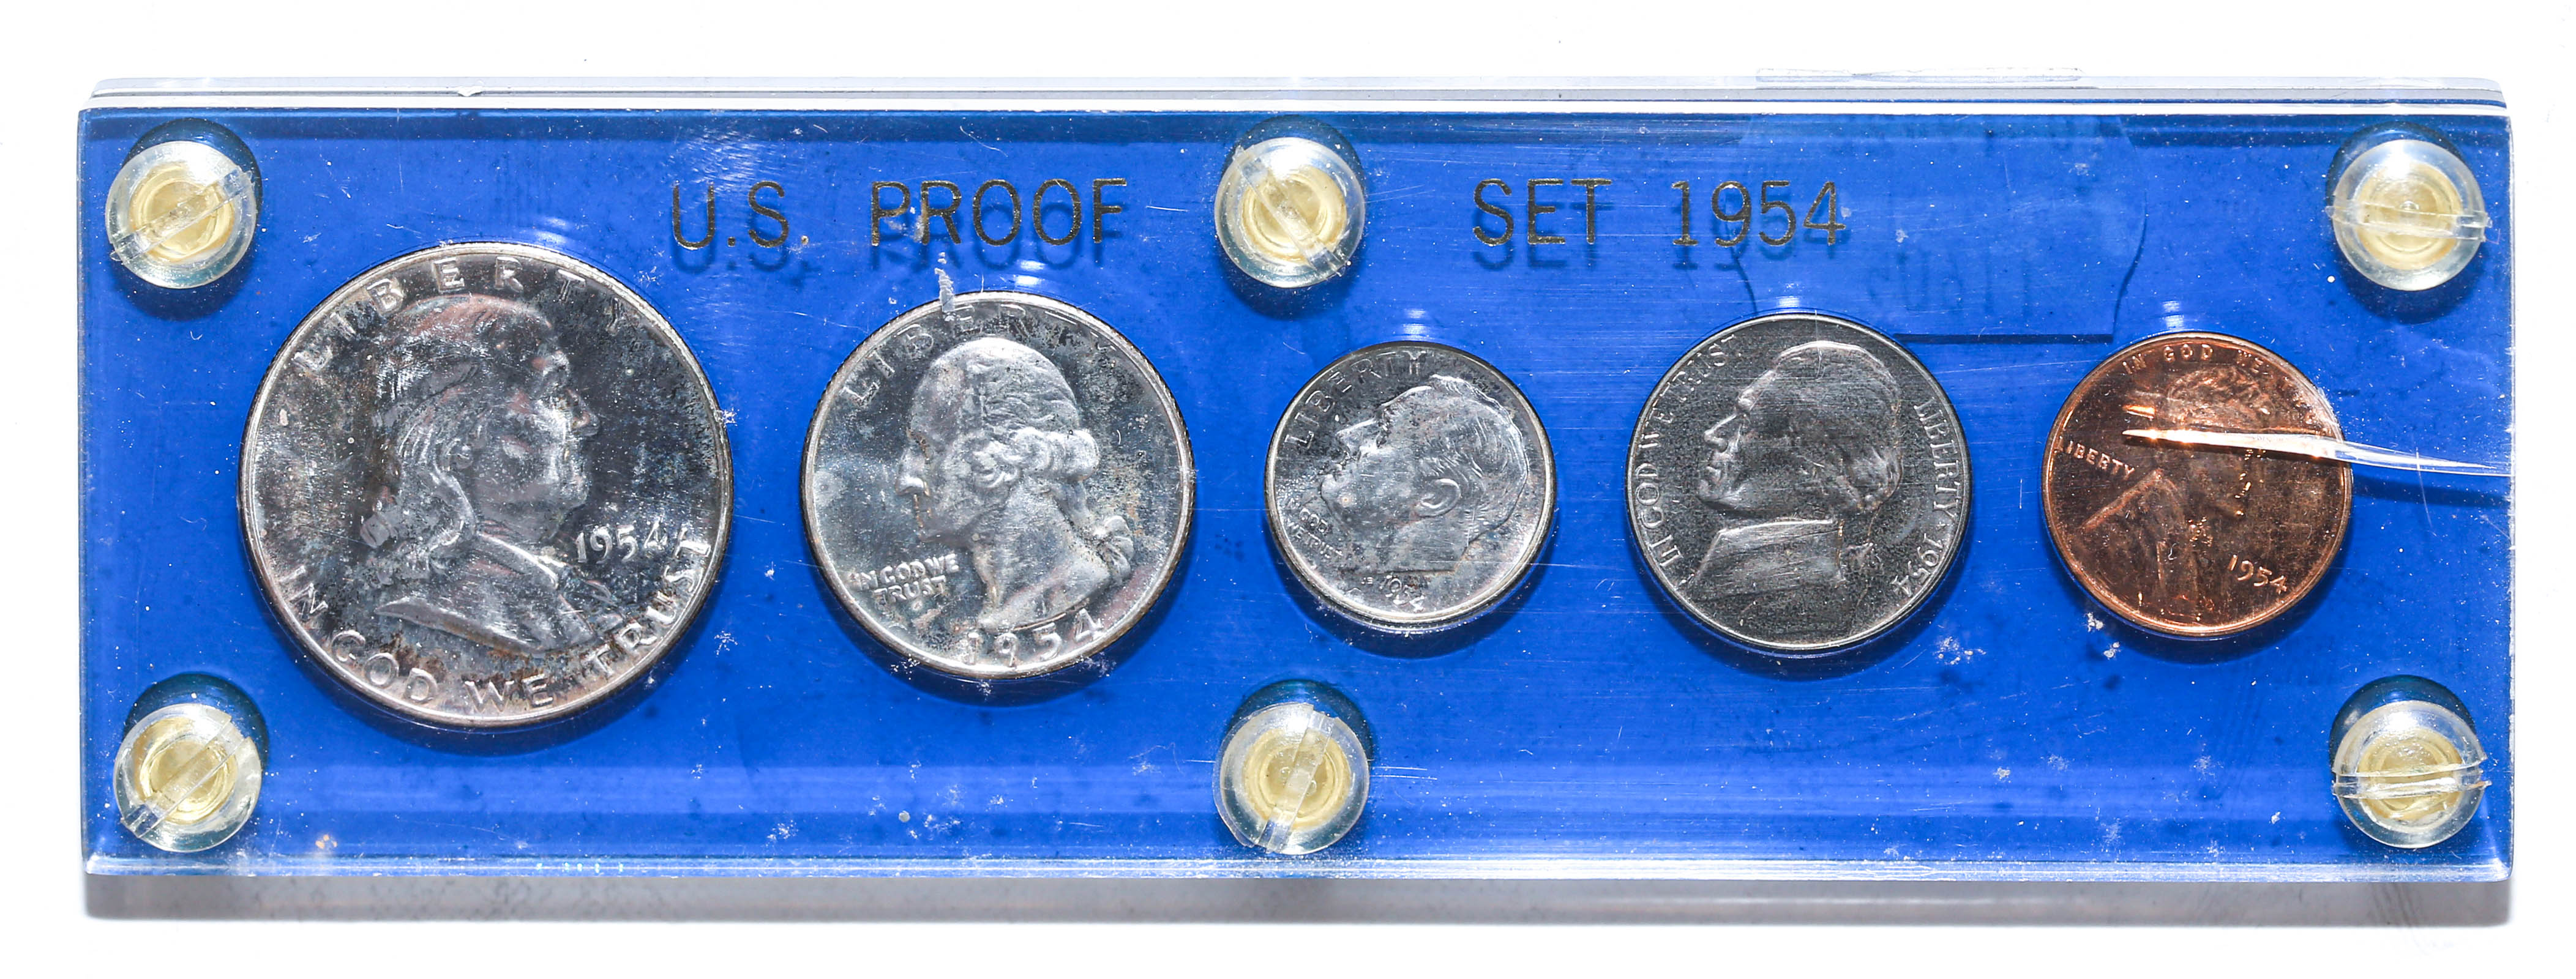 1954 US PROOF SET In a blue Capital